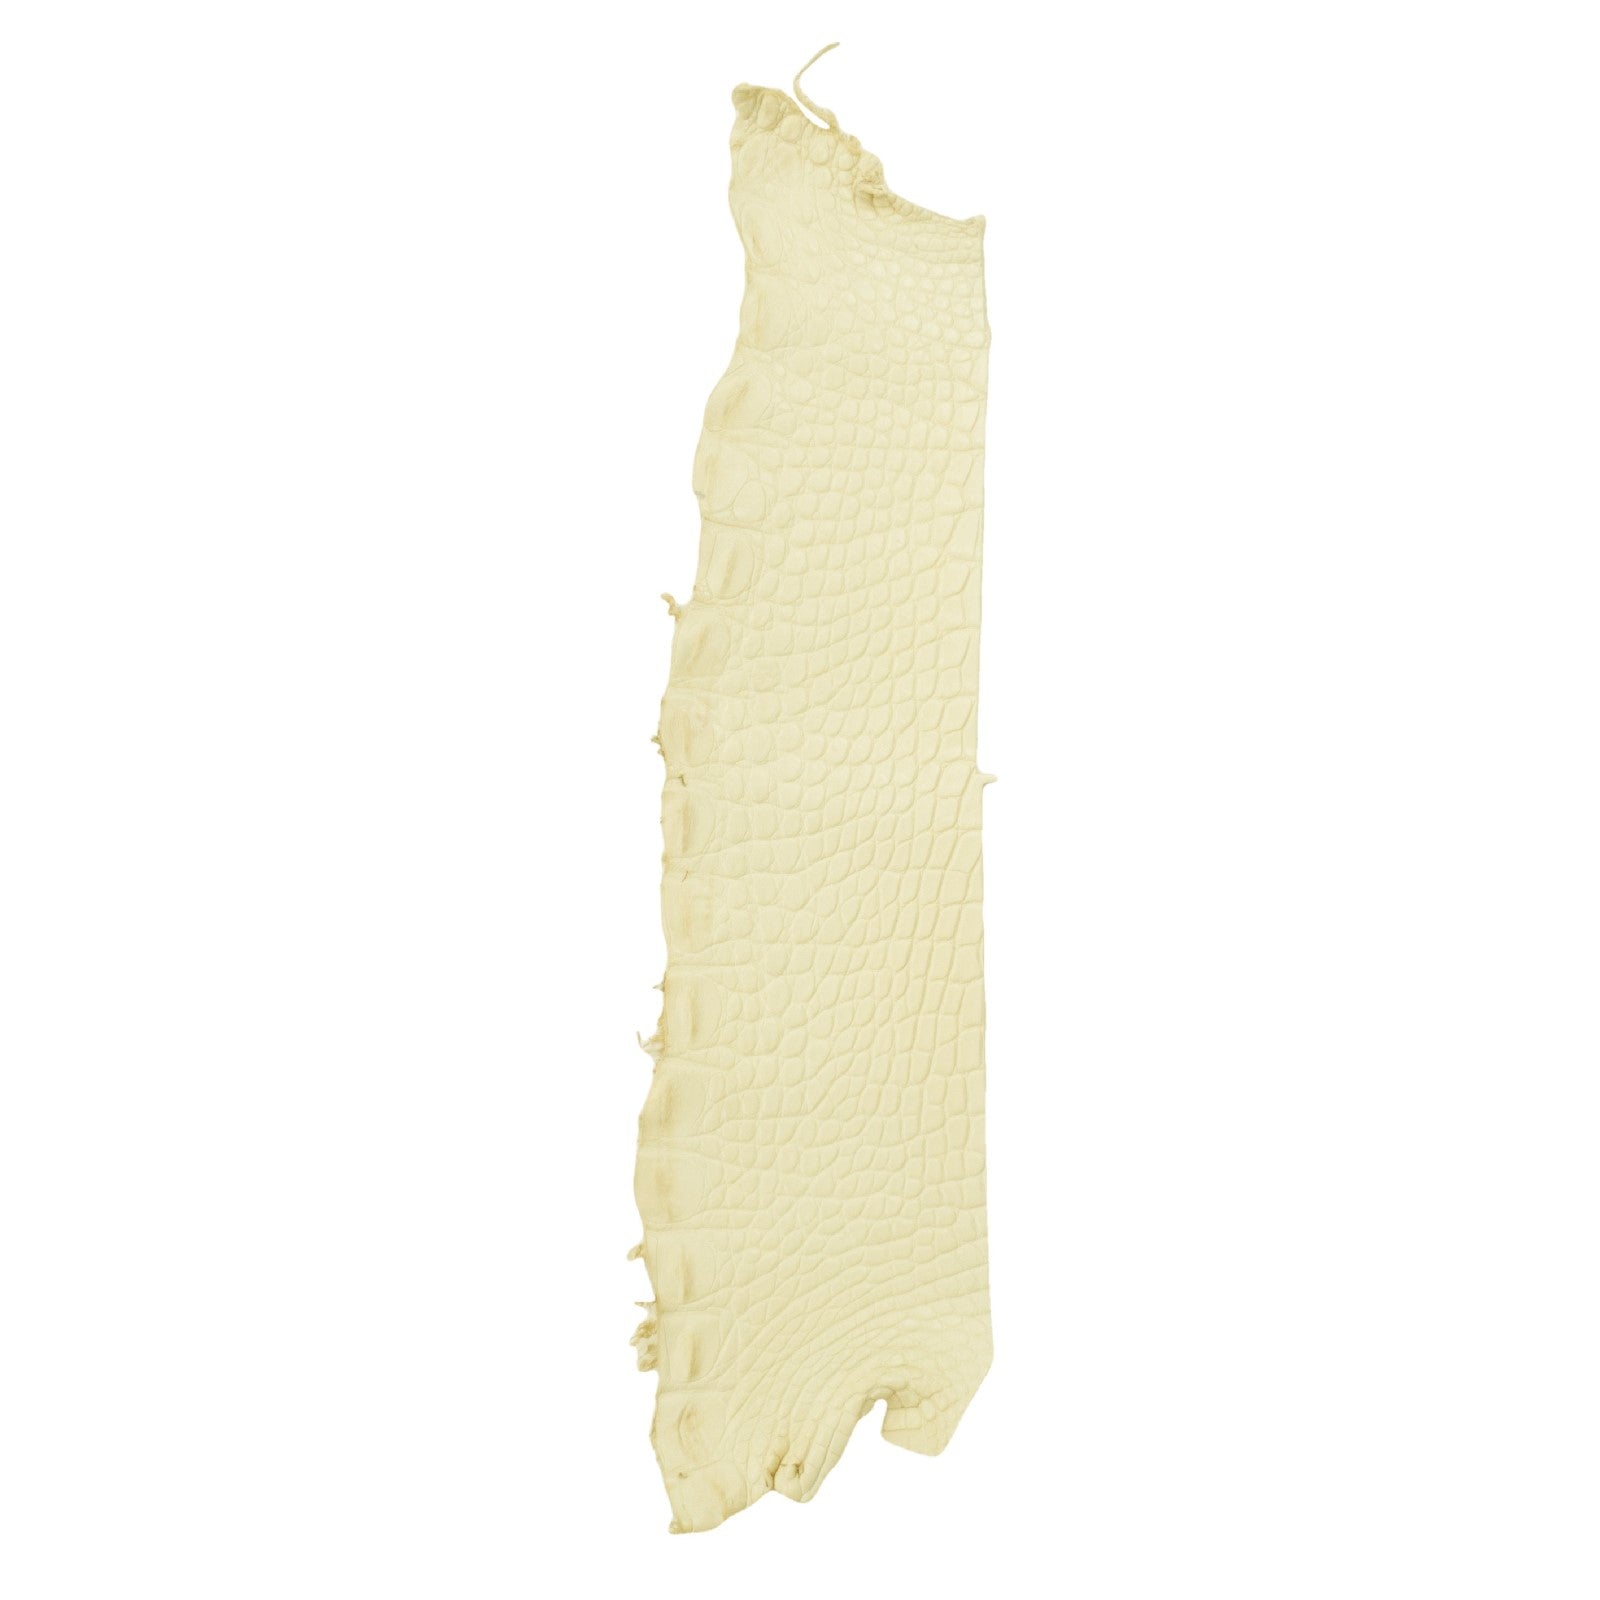 Alligator Skin Flank Various Colors Genuine Hide, Classic Cream | The Leather Guy